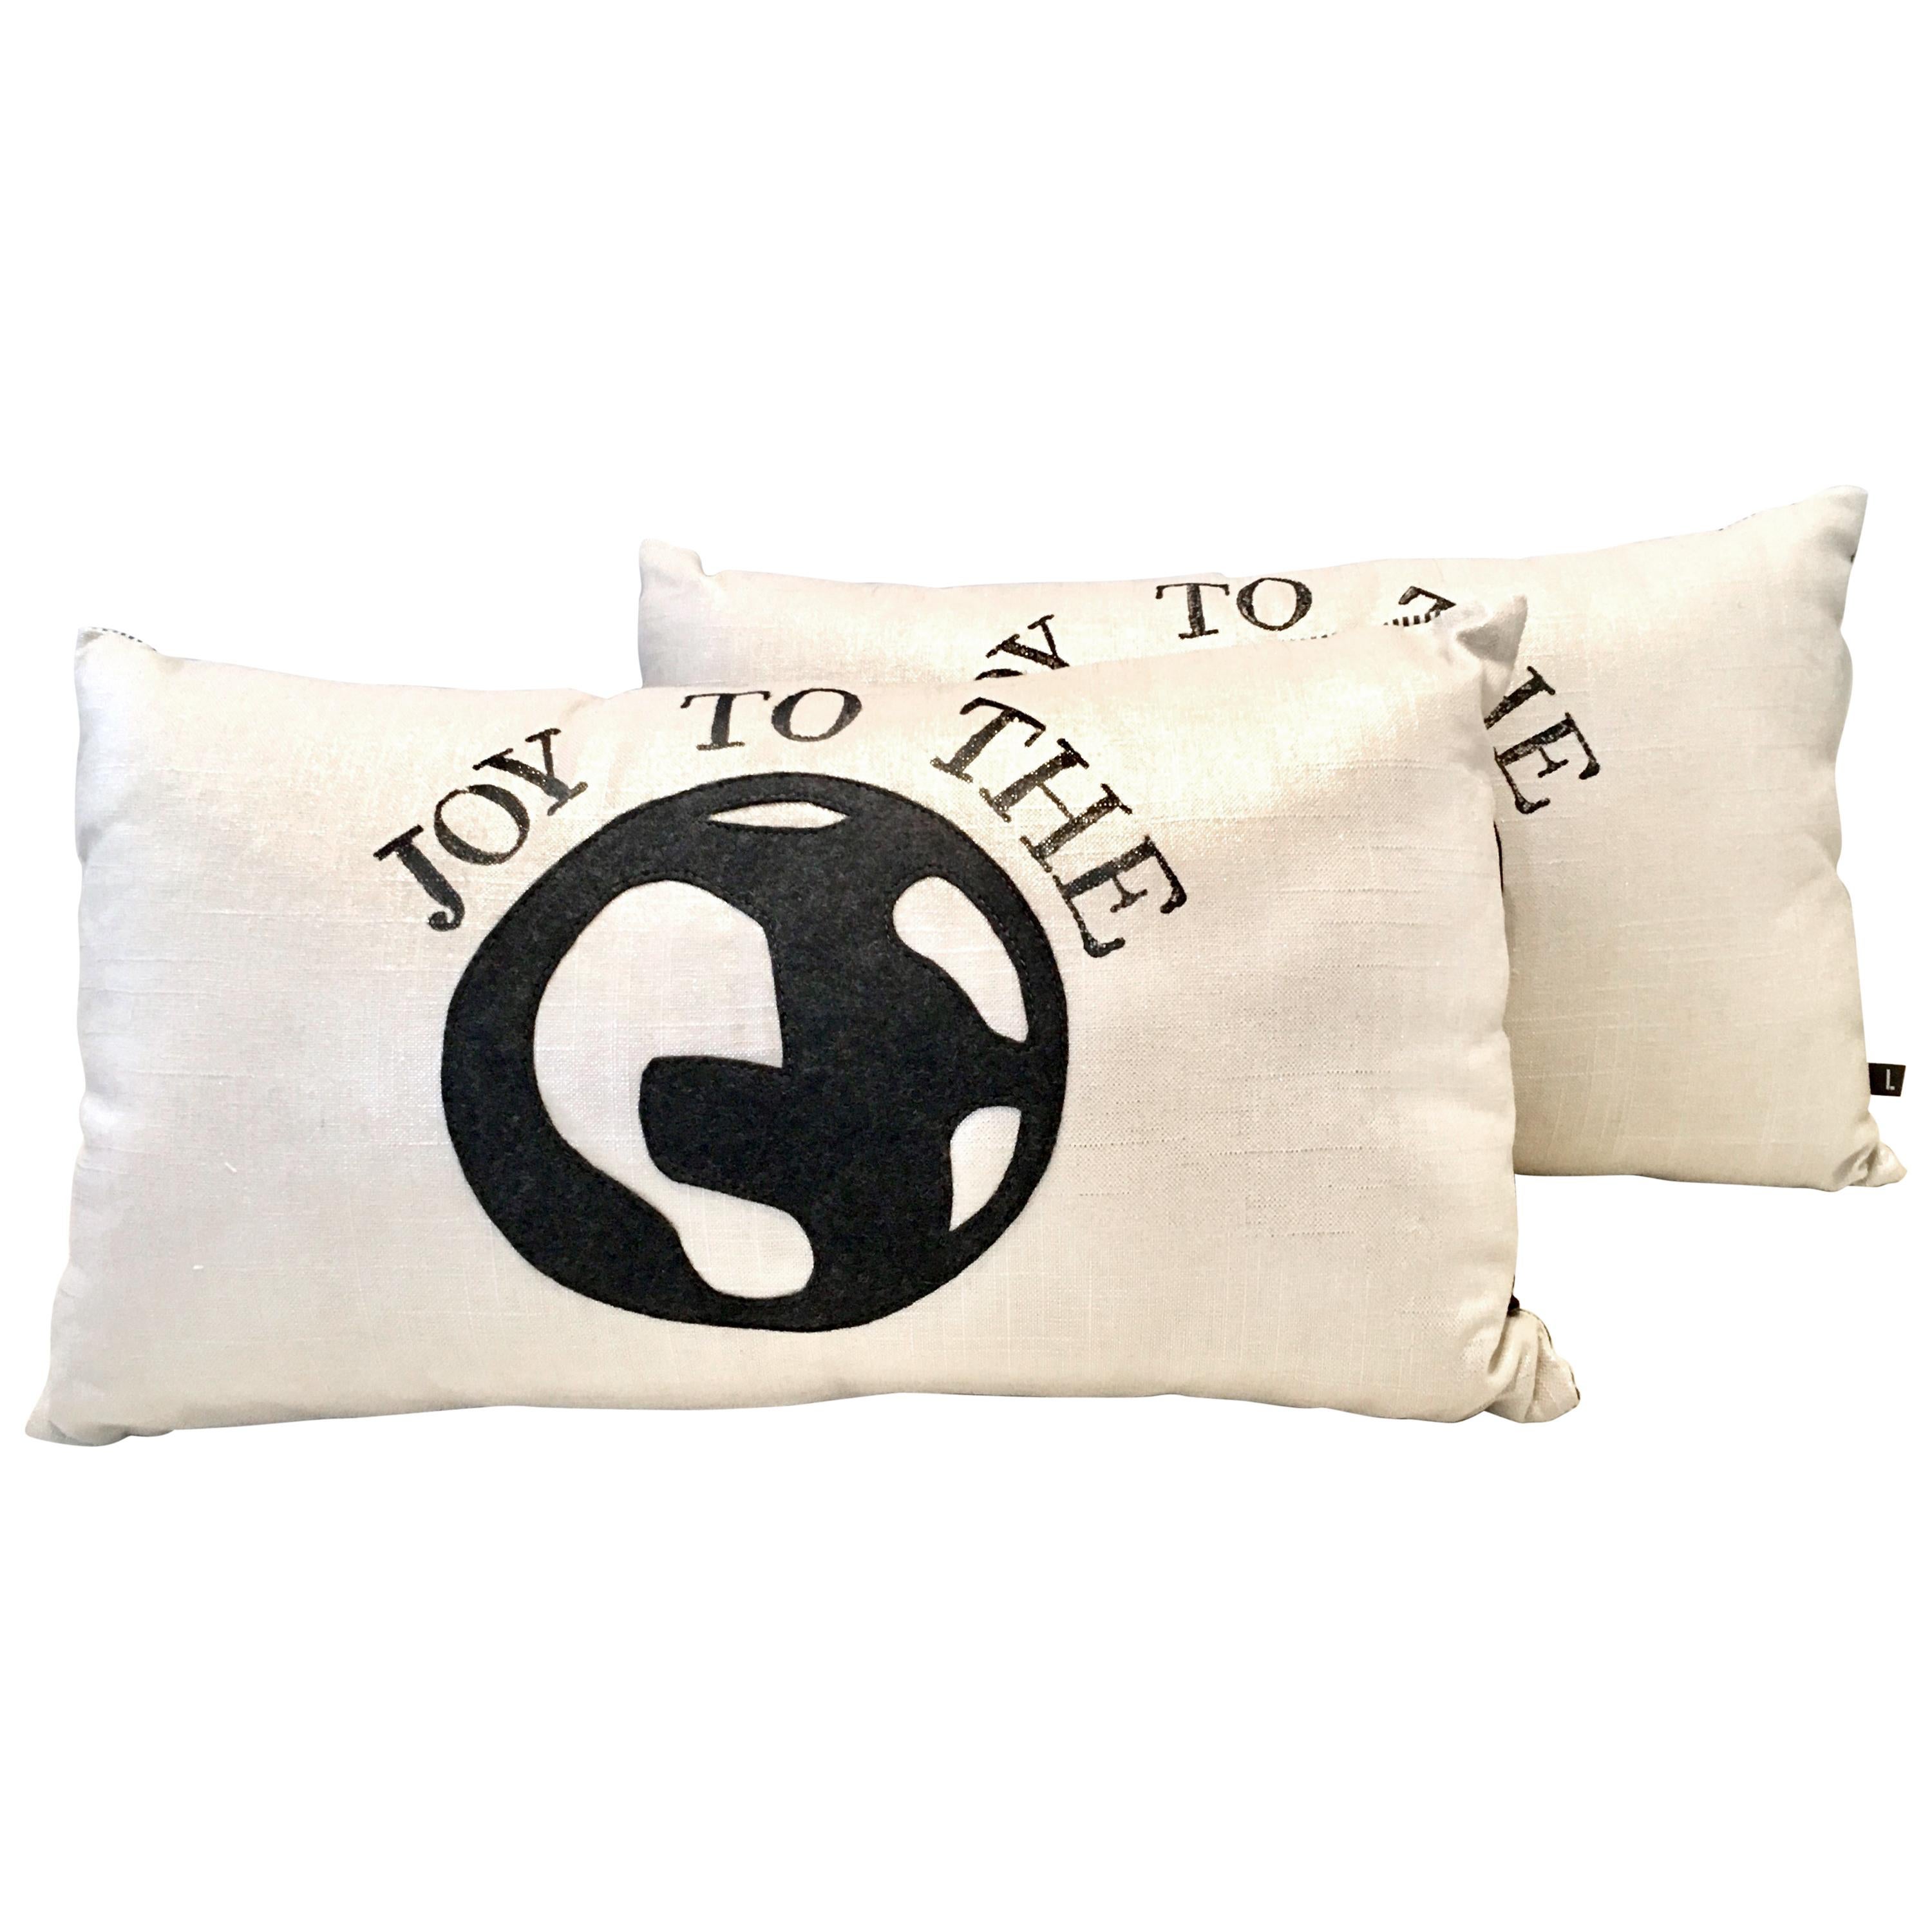 21st Century & New Pair of  "Joy To The World" Metallic Coated  Pillows S/2 For Sale